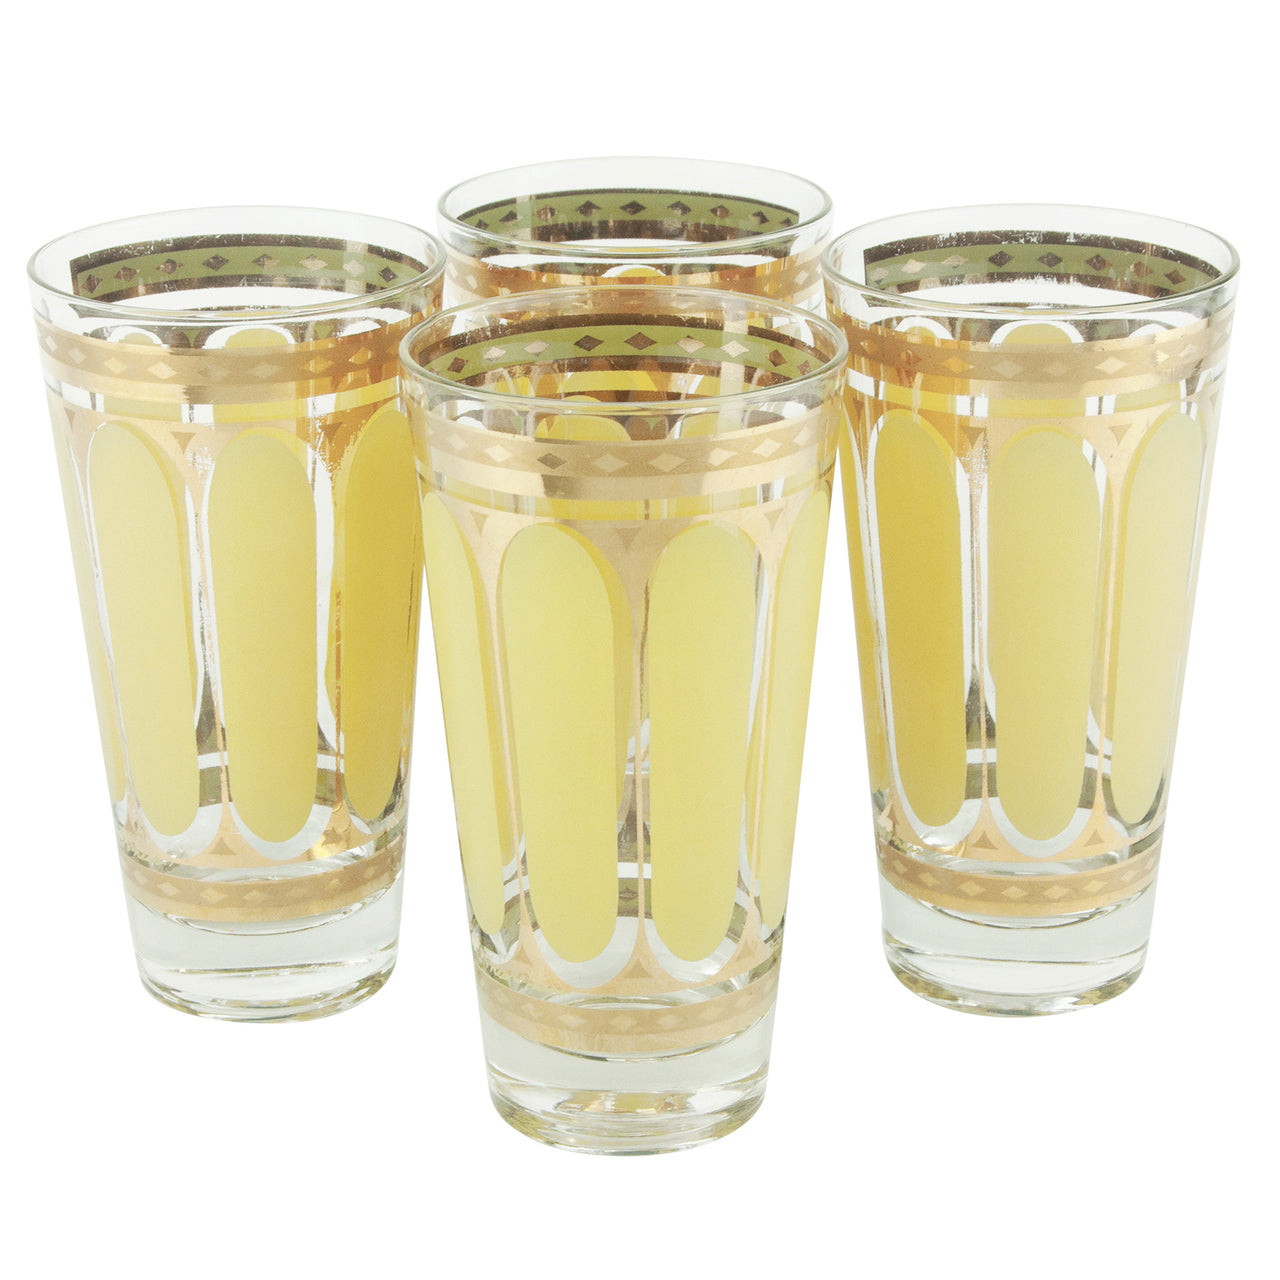 Vintage Fred Press Mustard & Gold Ovals Tapered Collins Glasses | The Hour Shop